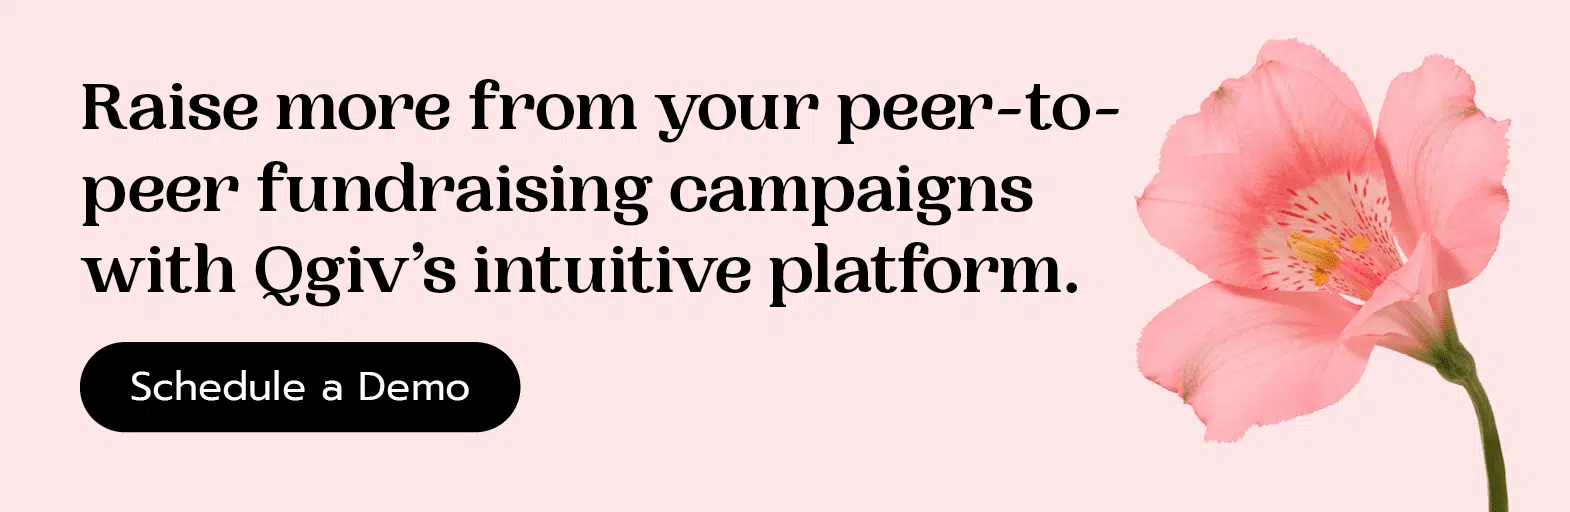 Raise more from your peer-to-peer fundraising campaigns with Qgiv’s intuitive platform. Schedule a demo here.